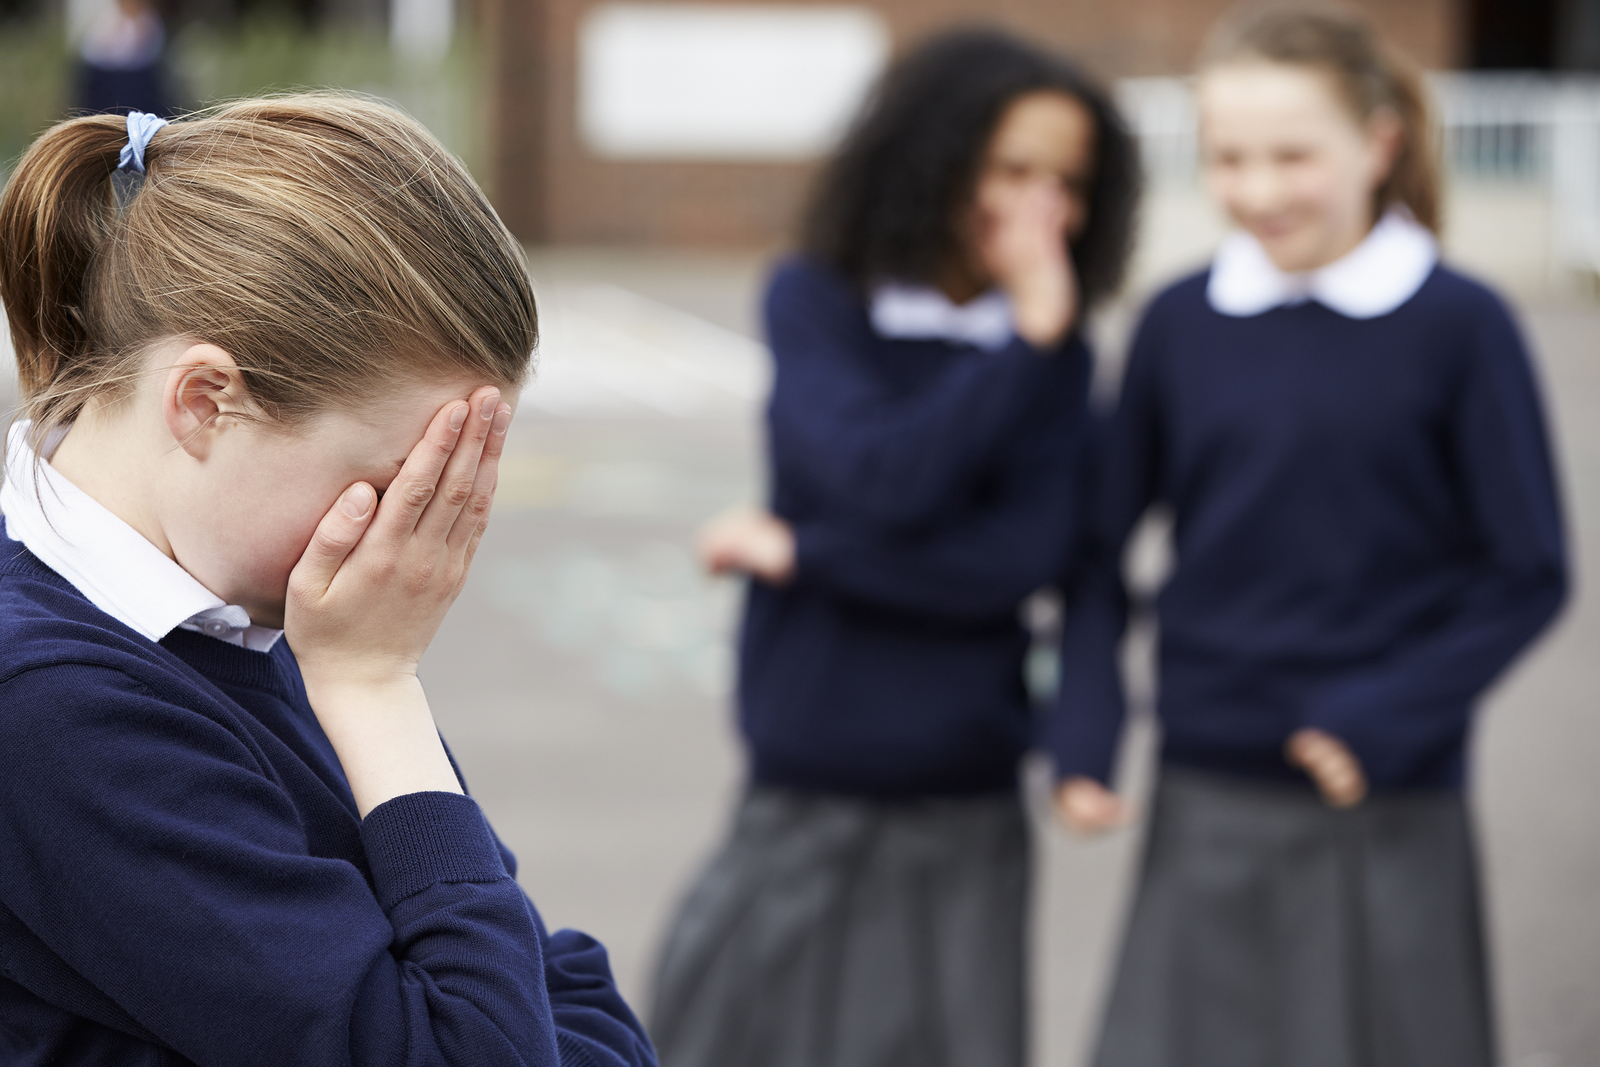 My High School Bully 150 What to do if bullying doesn't stop | TheSchoolRun